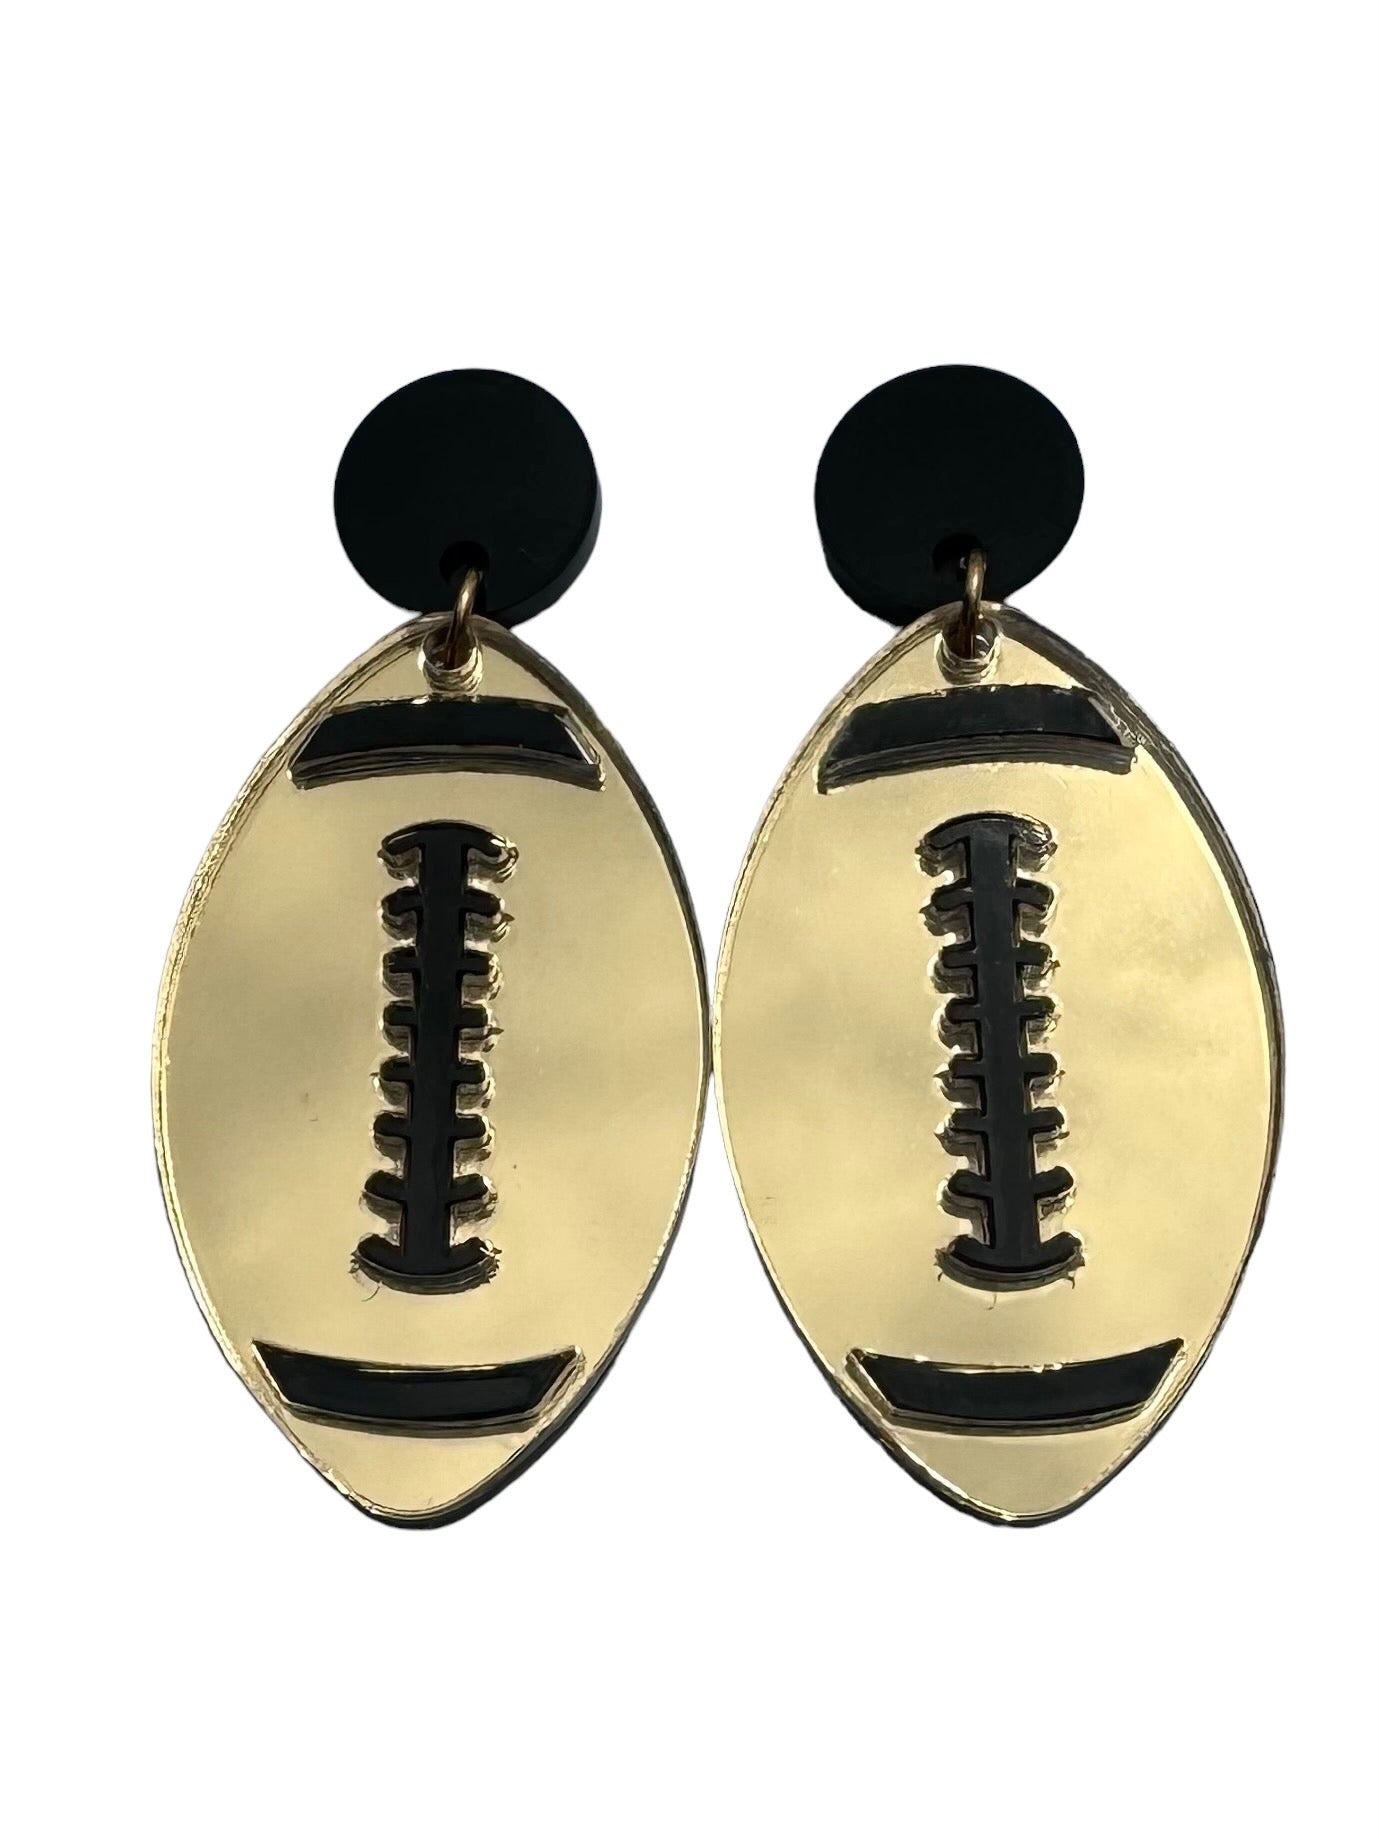 Gold Mirrored Football with Black Laces